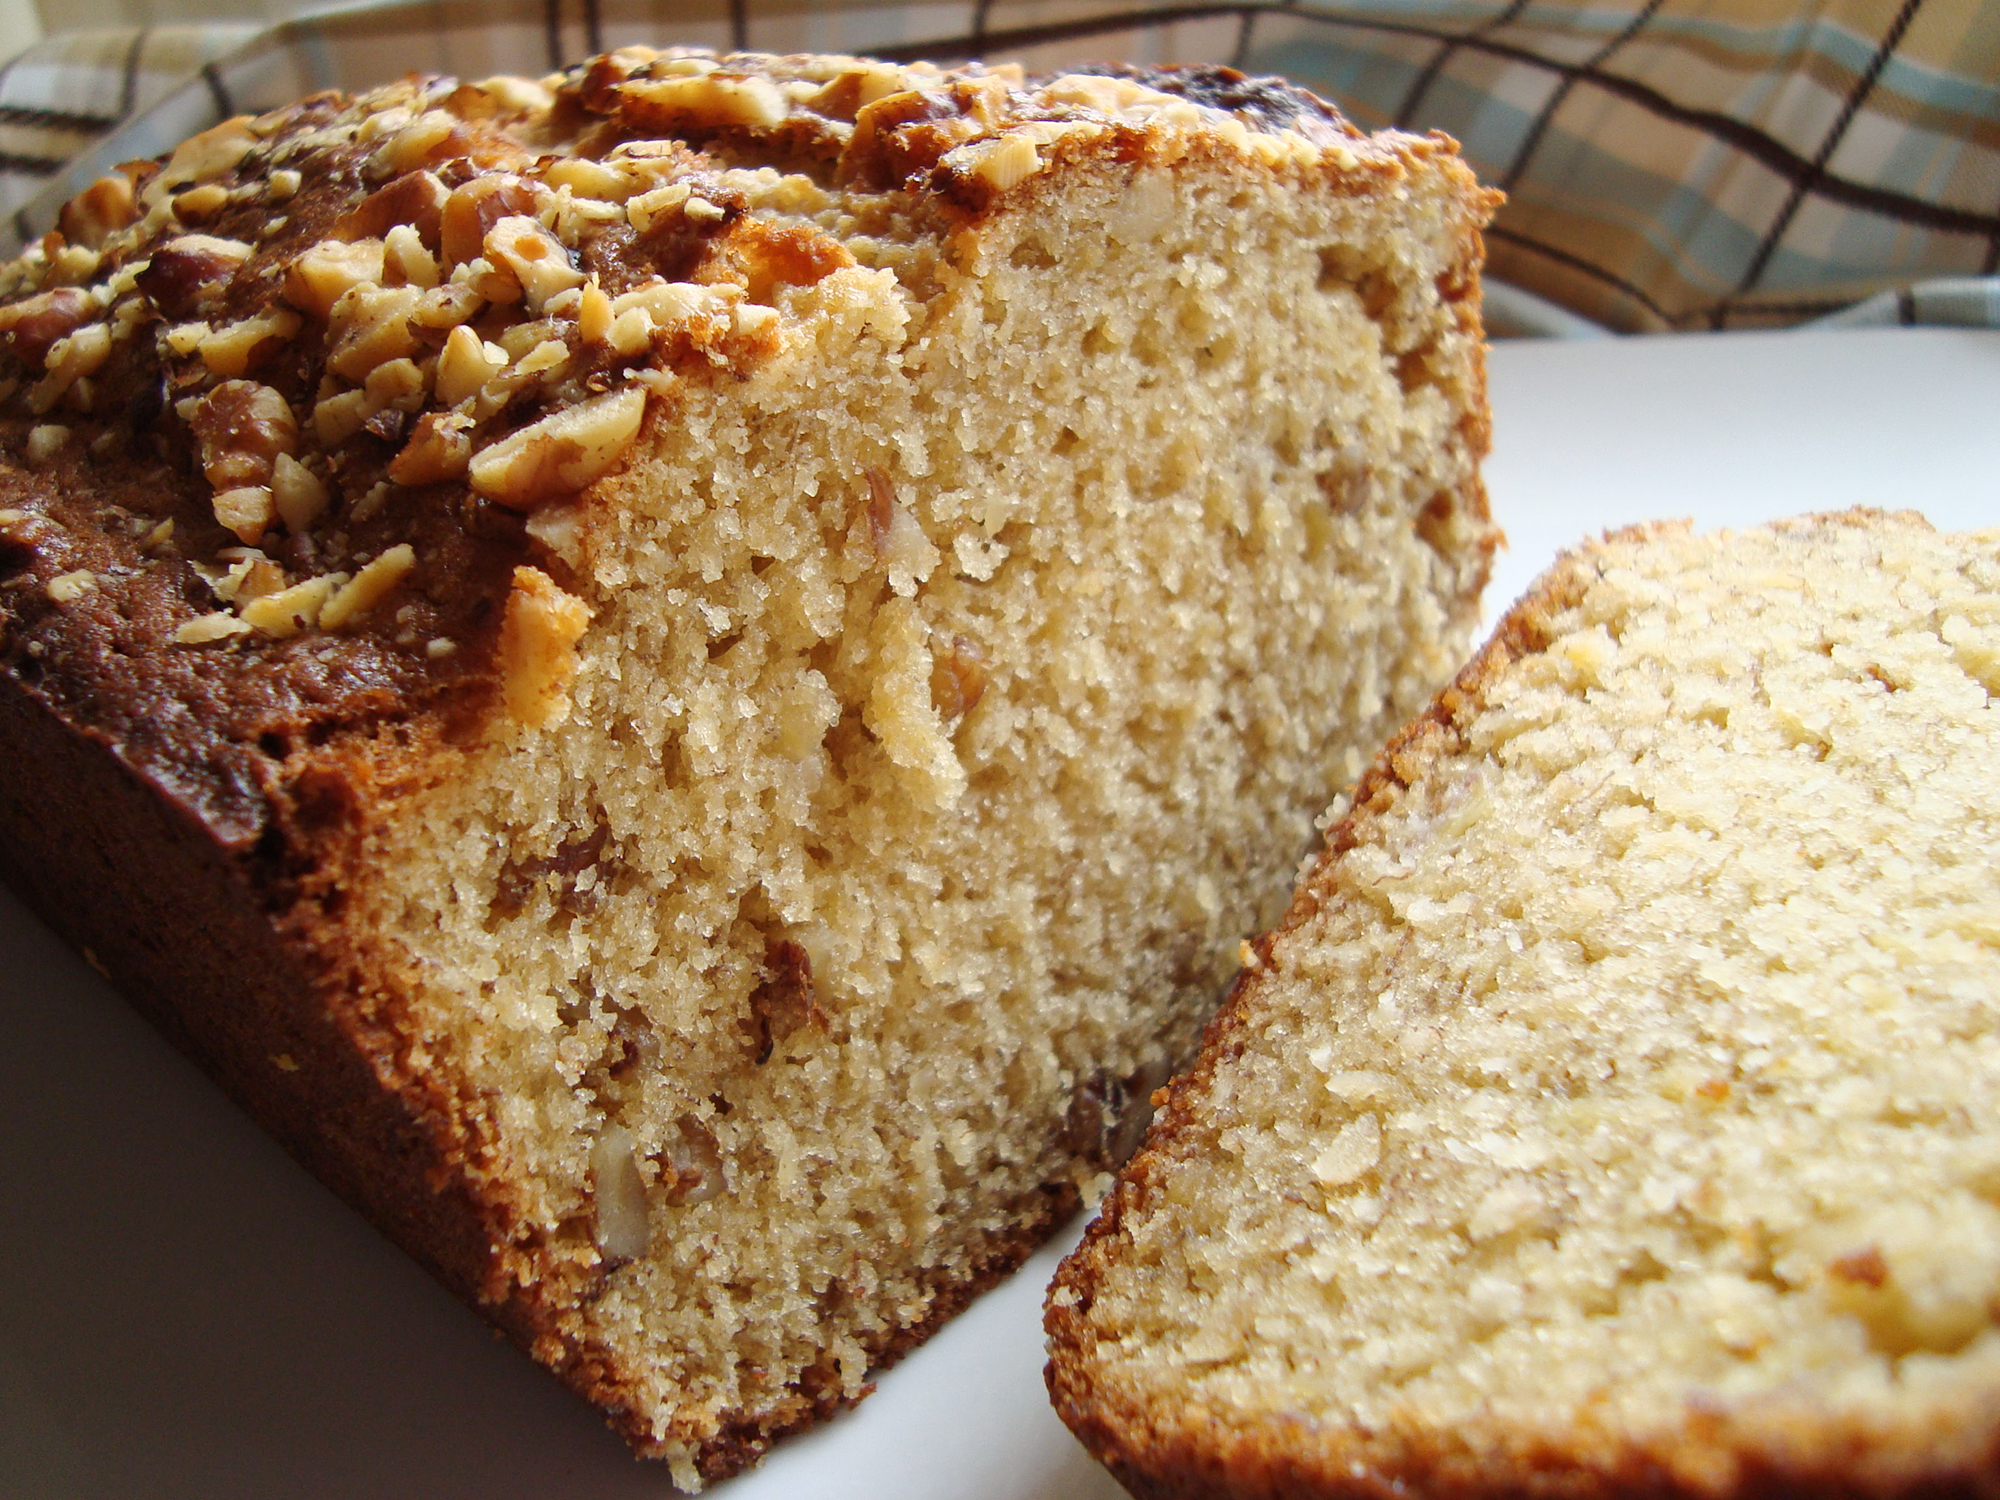 close up view of a sliced Brown Sugar Banana Nut Bread on a plate